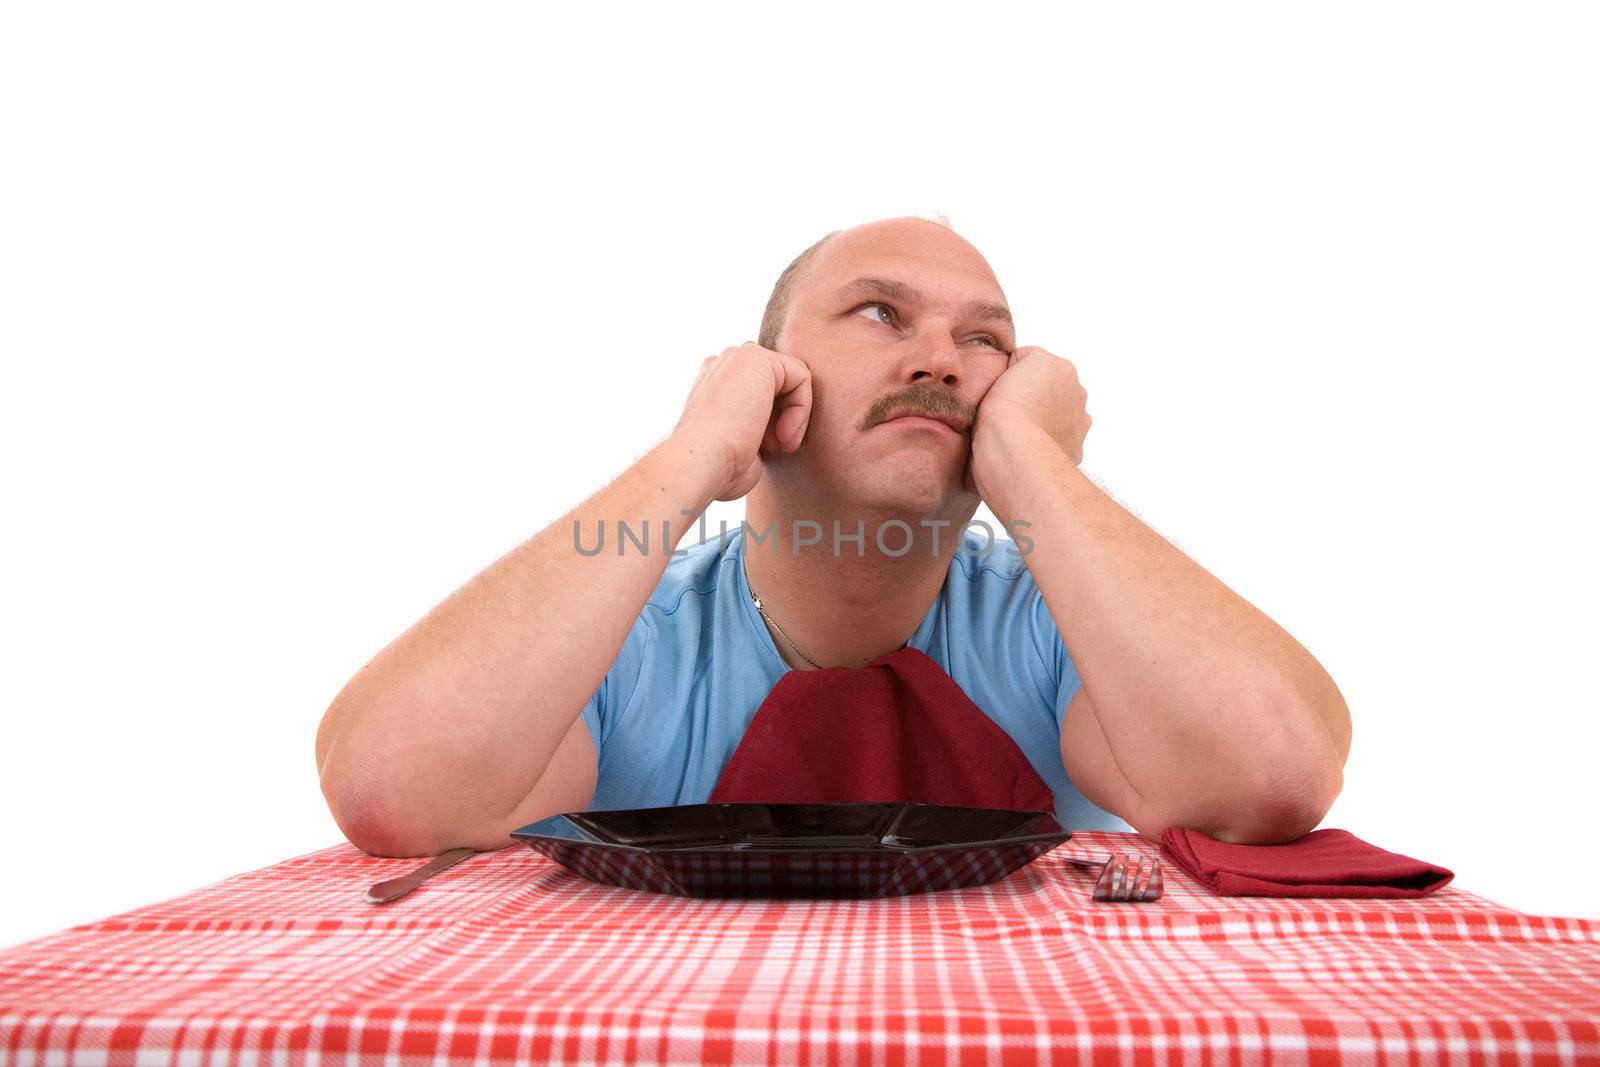 Overweight man looking very unhappy with empty plate in front of him